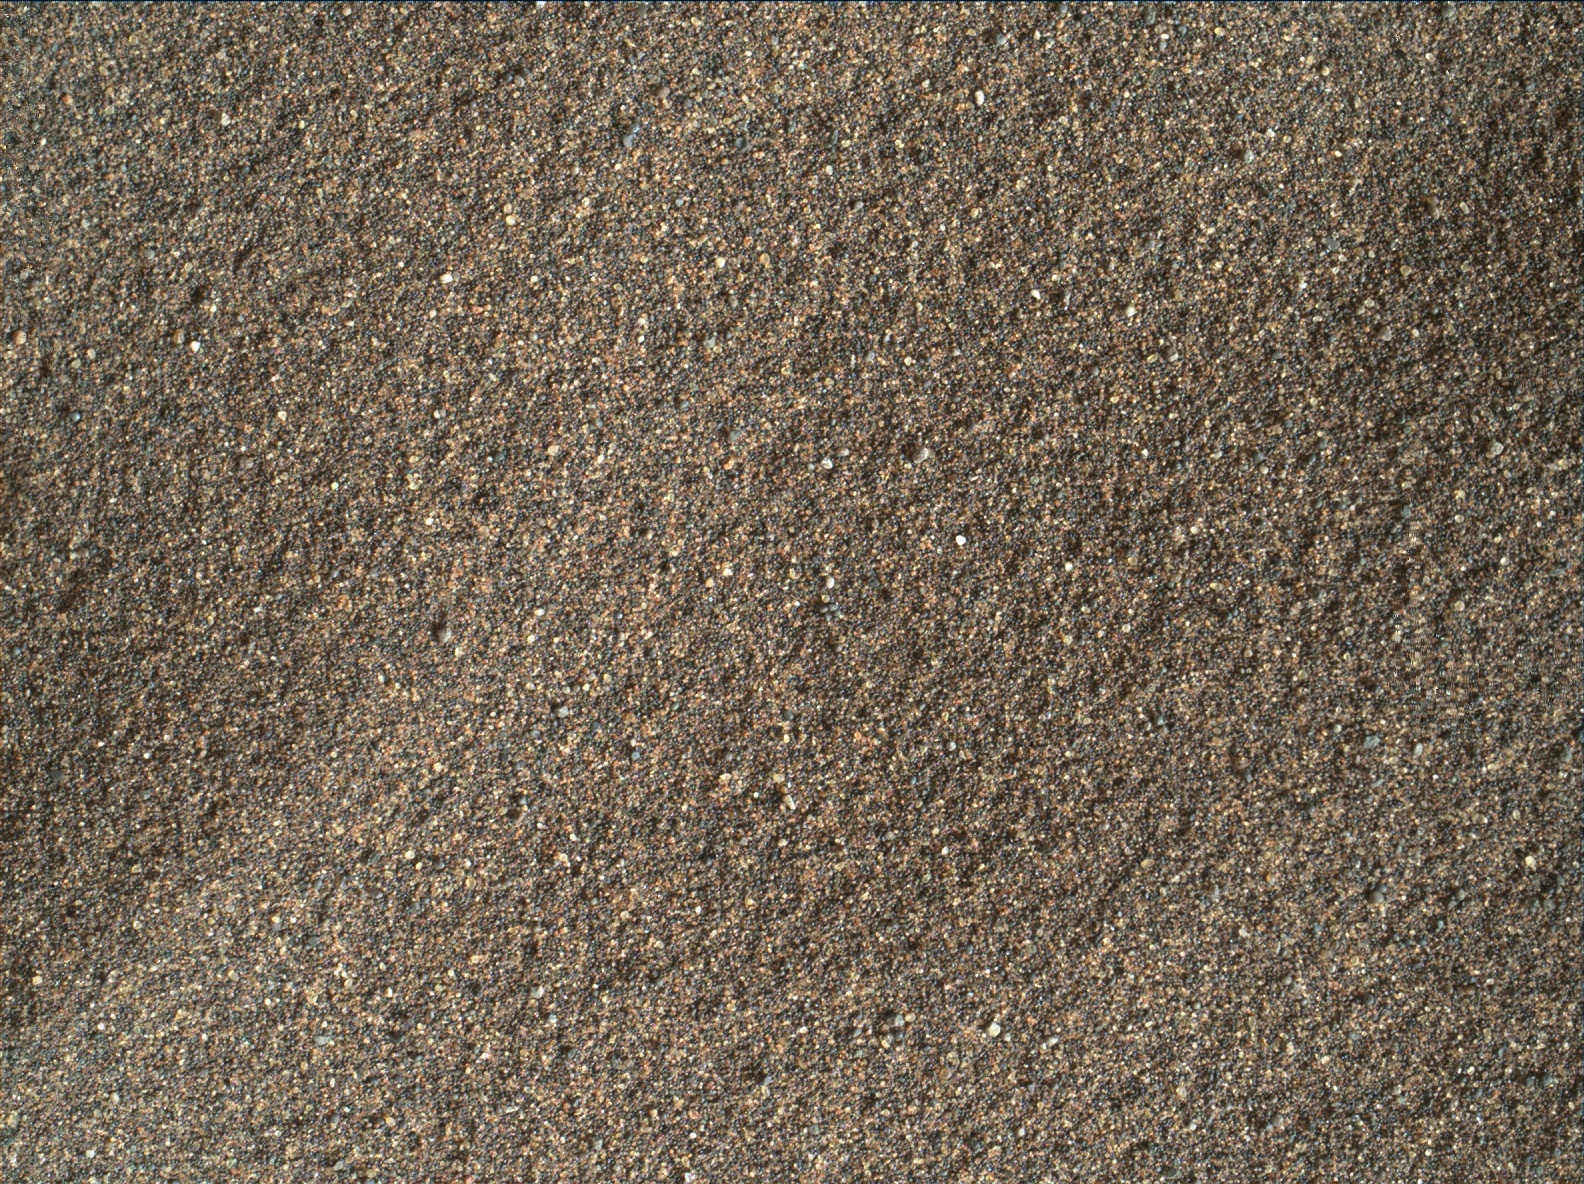 Nasa's Mars rover Curiosity acquired this image using its Mars Hand Lens Imager (MAHLI) on Sol 1619